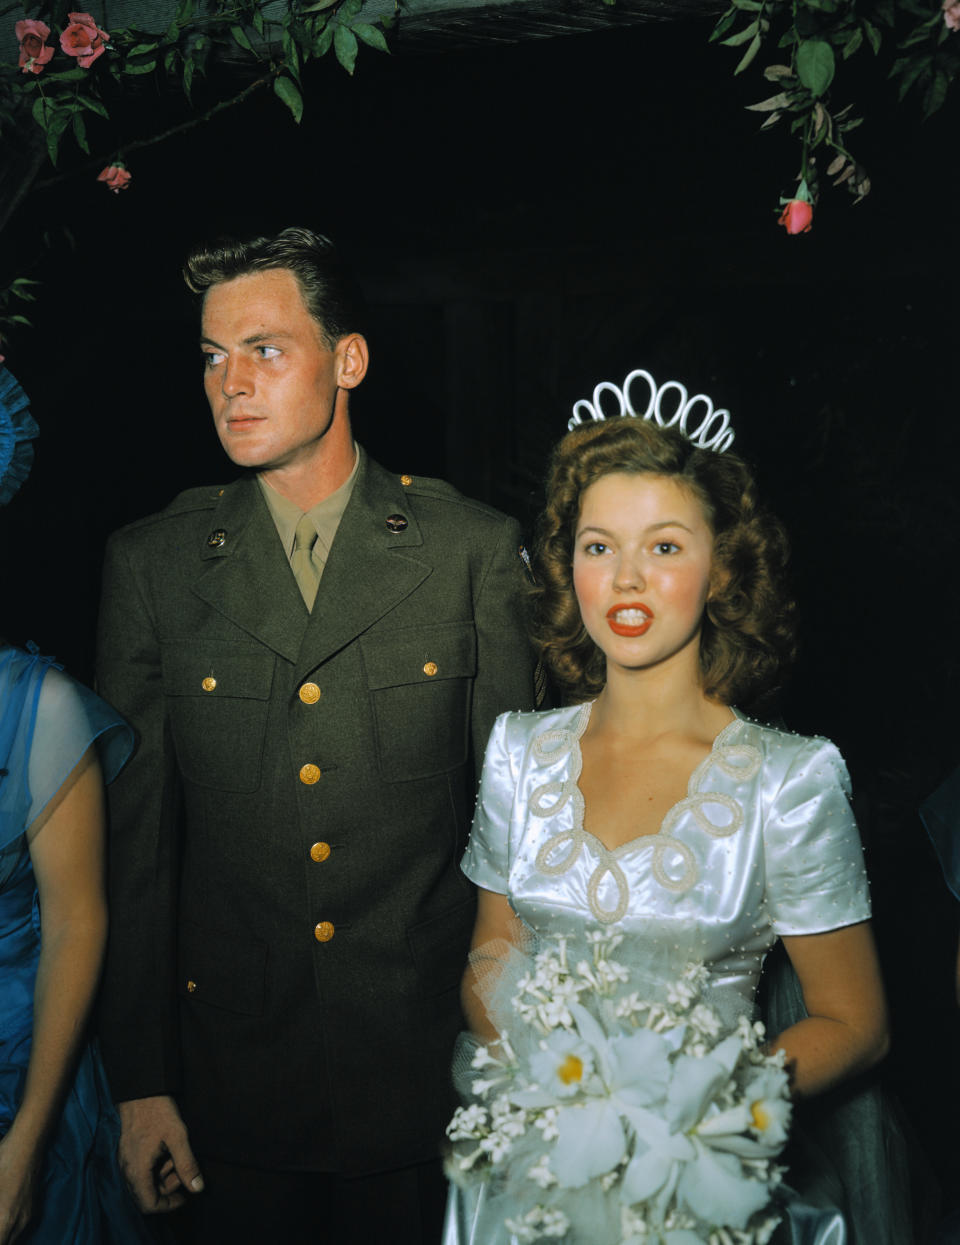 Man in military uniform beside a woman in a tiara and white dress holding flowers. They are both glancing to their left